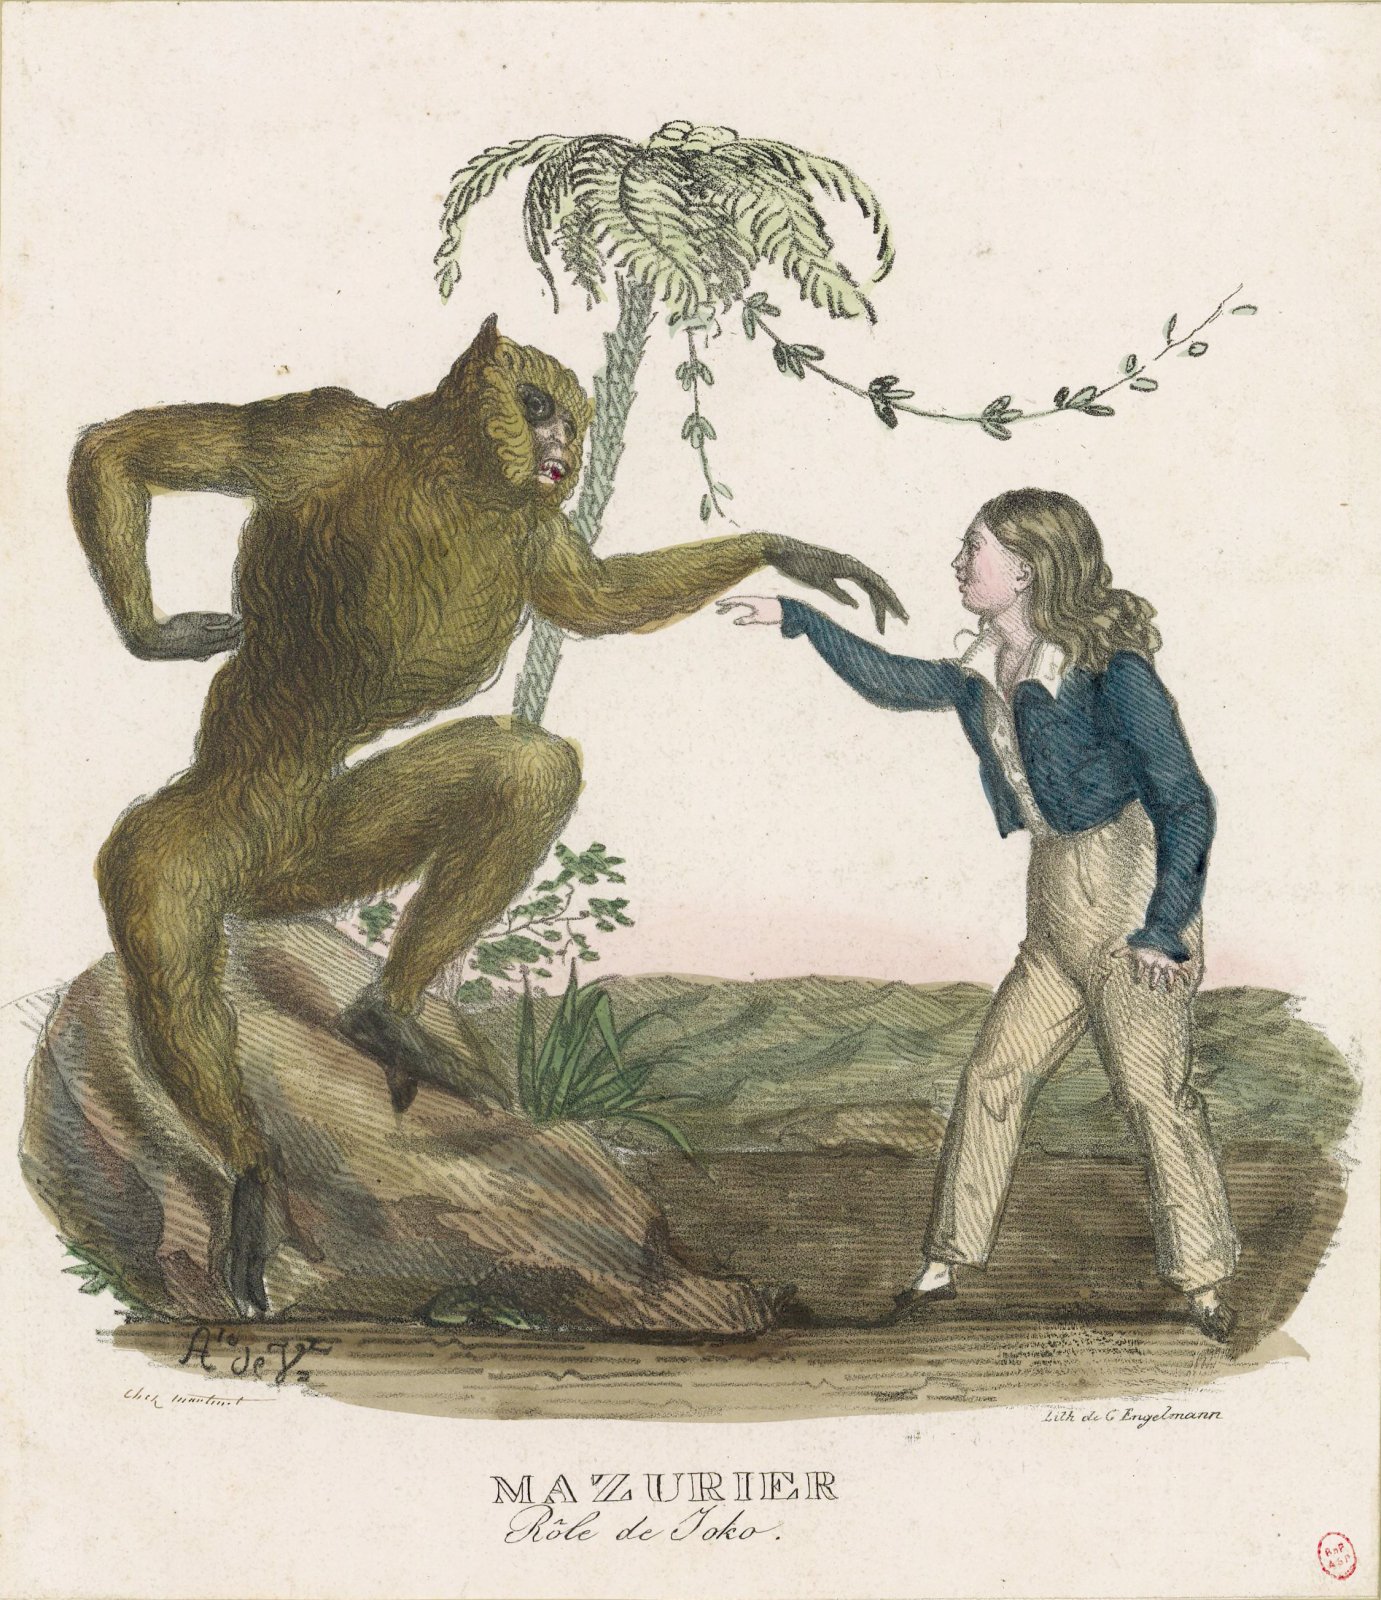 Godefroy Engelmann, Charles François Mazurier as the Jocko Monkey (here with a child saved from a shipwreck), 1825, colour lithography, collection of the Bibliothèque nationale de France.